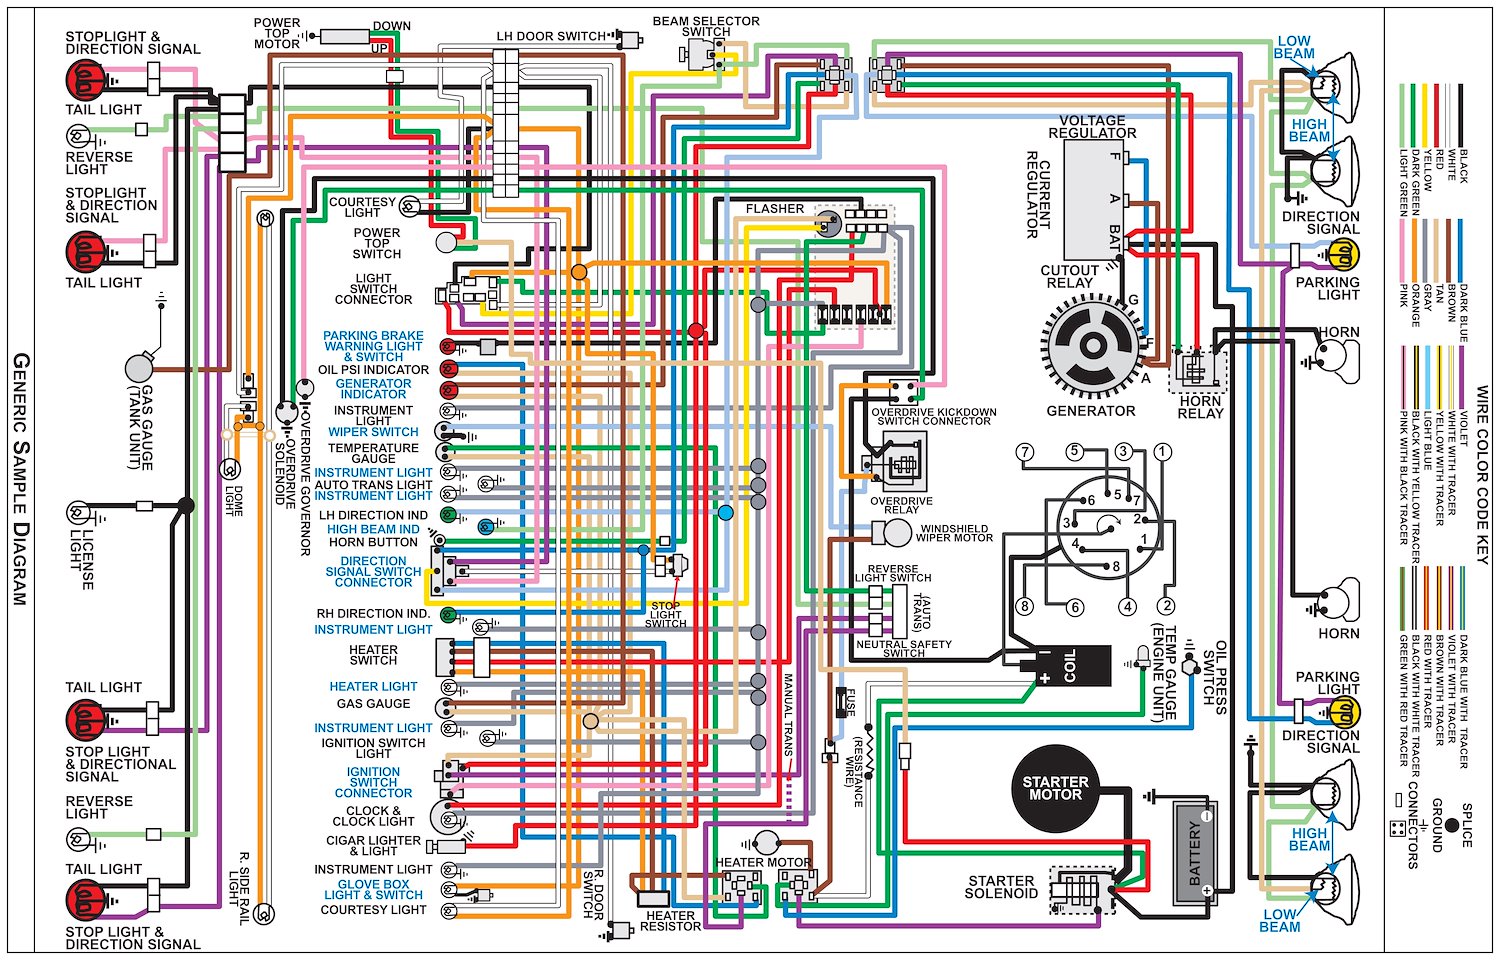 Wiring Diagram for 1972 Dodge Charger with Rallye Dash, 11 in x 17 in., Laminated